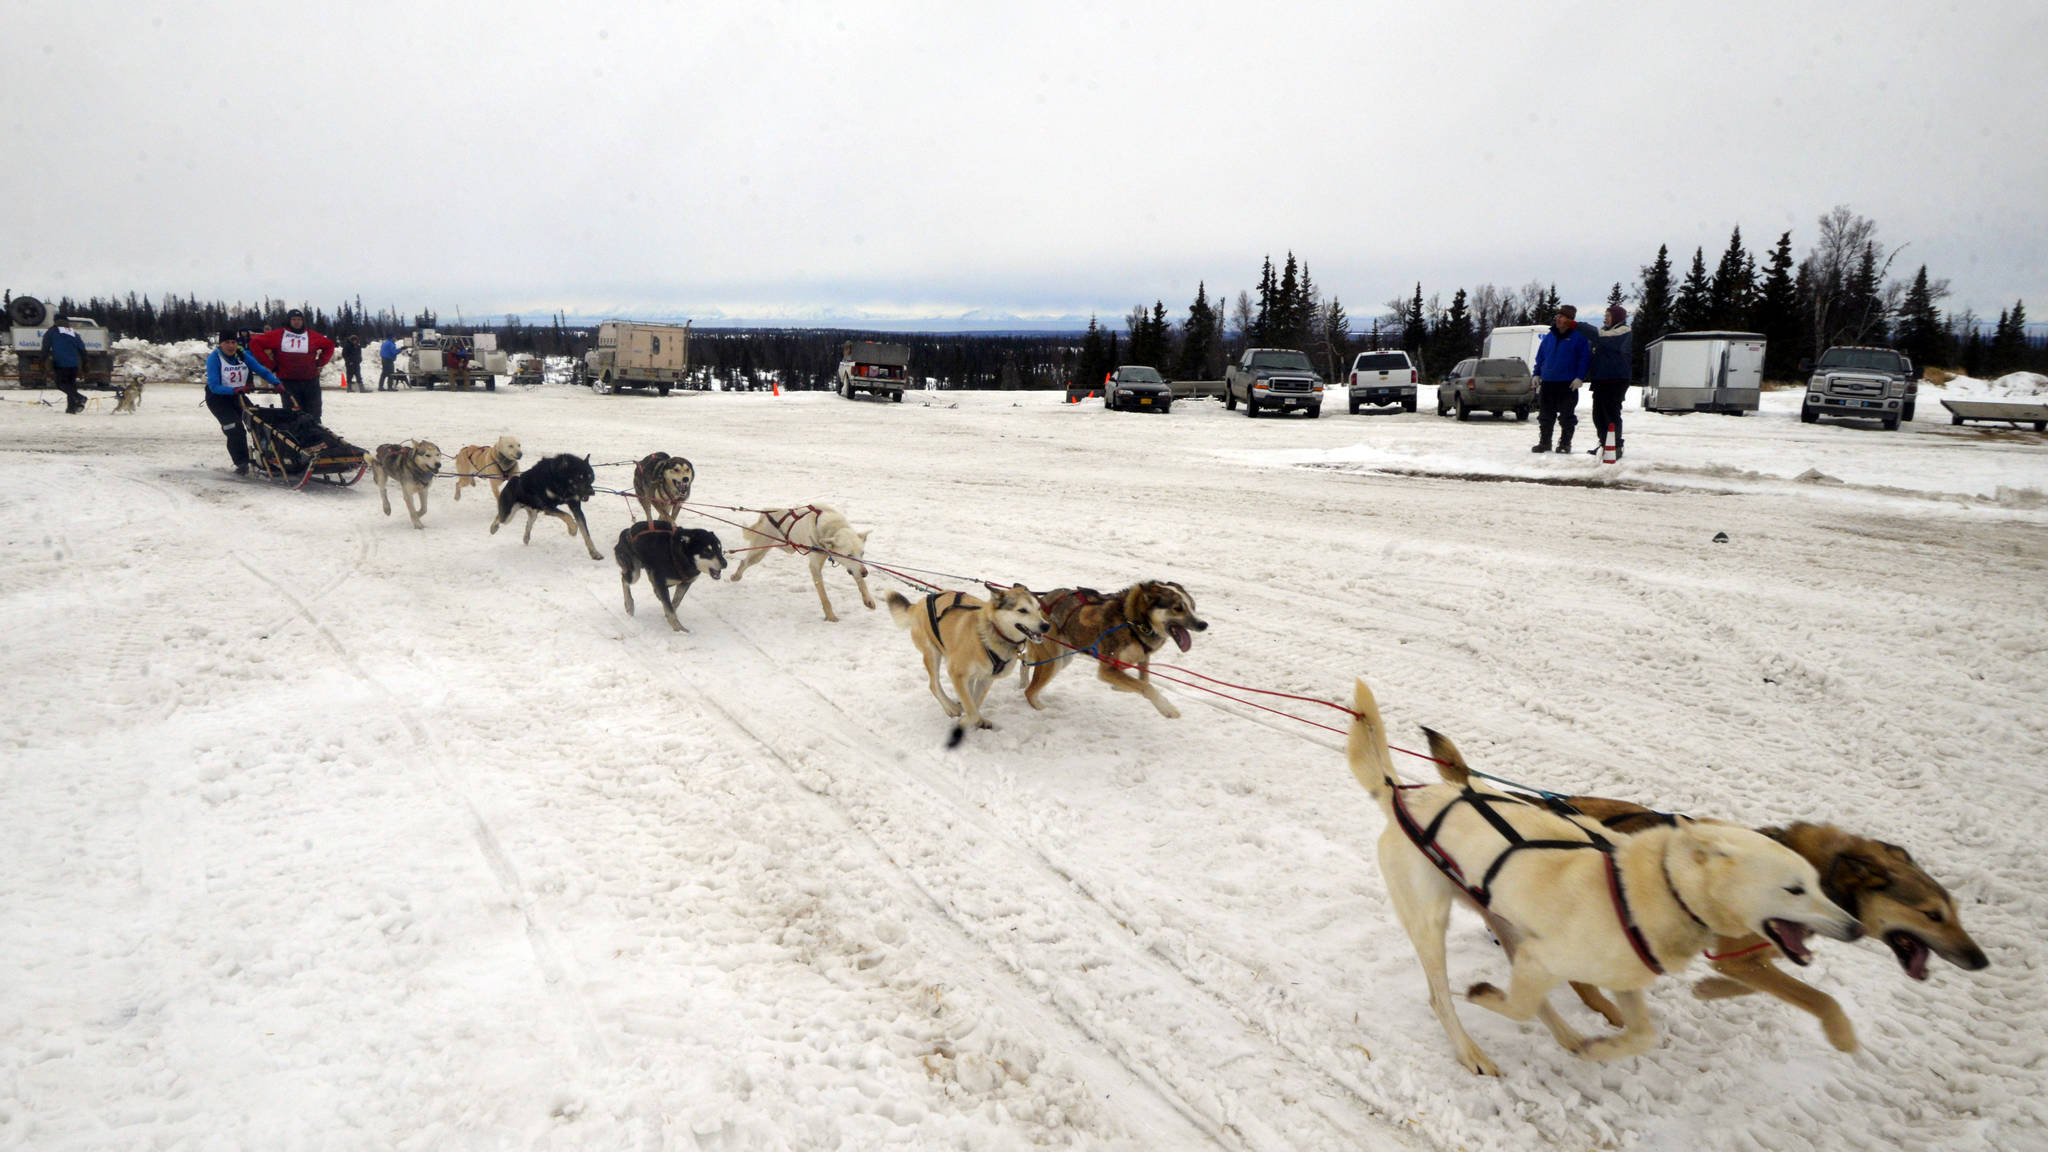 A dog sled takes off at the start of Freddie’s Midnight Run in Caribou Hills on Saturday, April 1. The 86-mile race is made up of two runs of a 43-mile trail through Caribou Hills, starting at ending at Freddie’s Roadhouse. (Kat Sorensen/Peninsula Clarion).